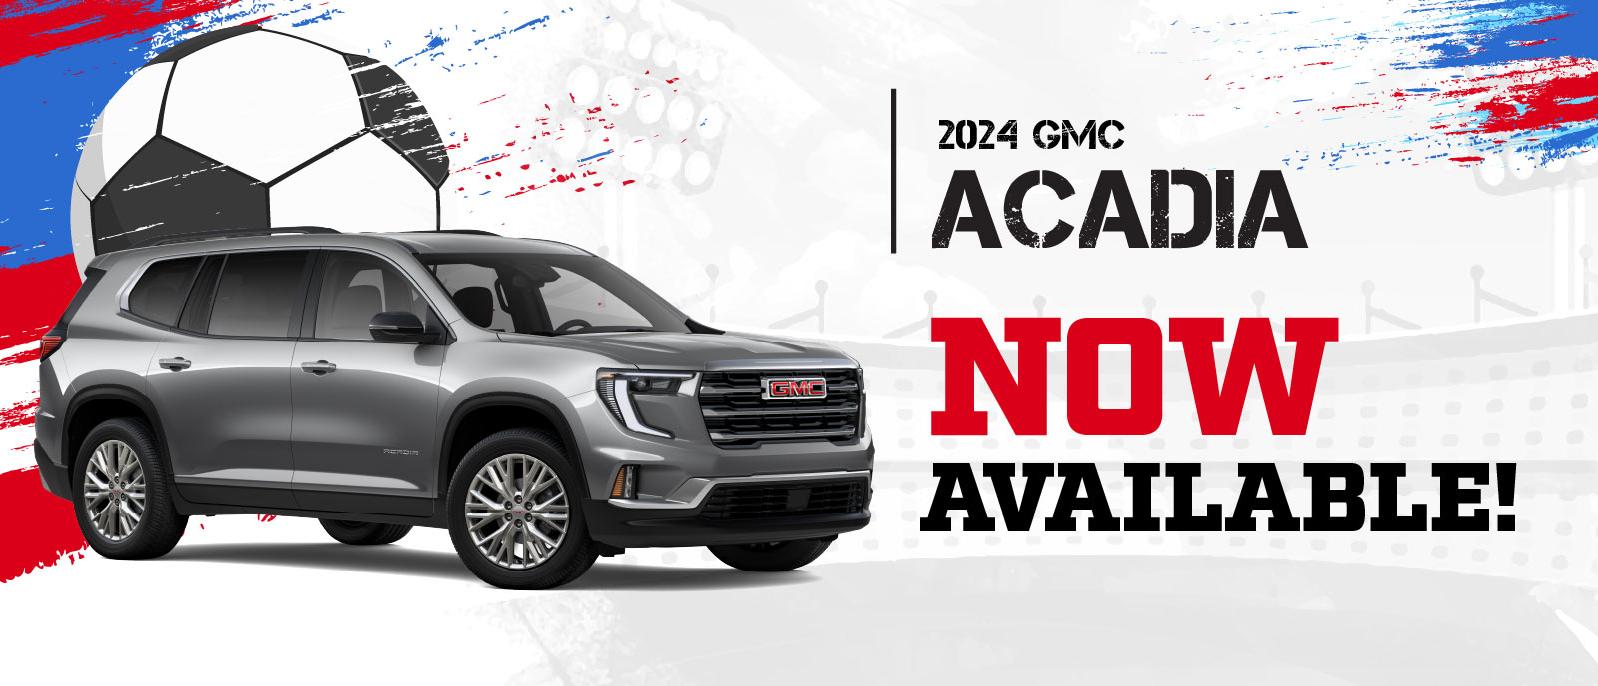 2024 GMC Acadia - Now available